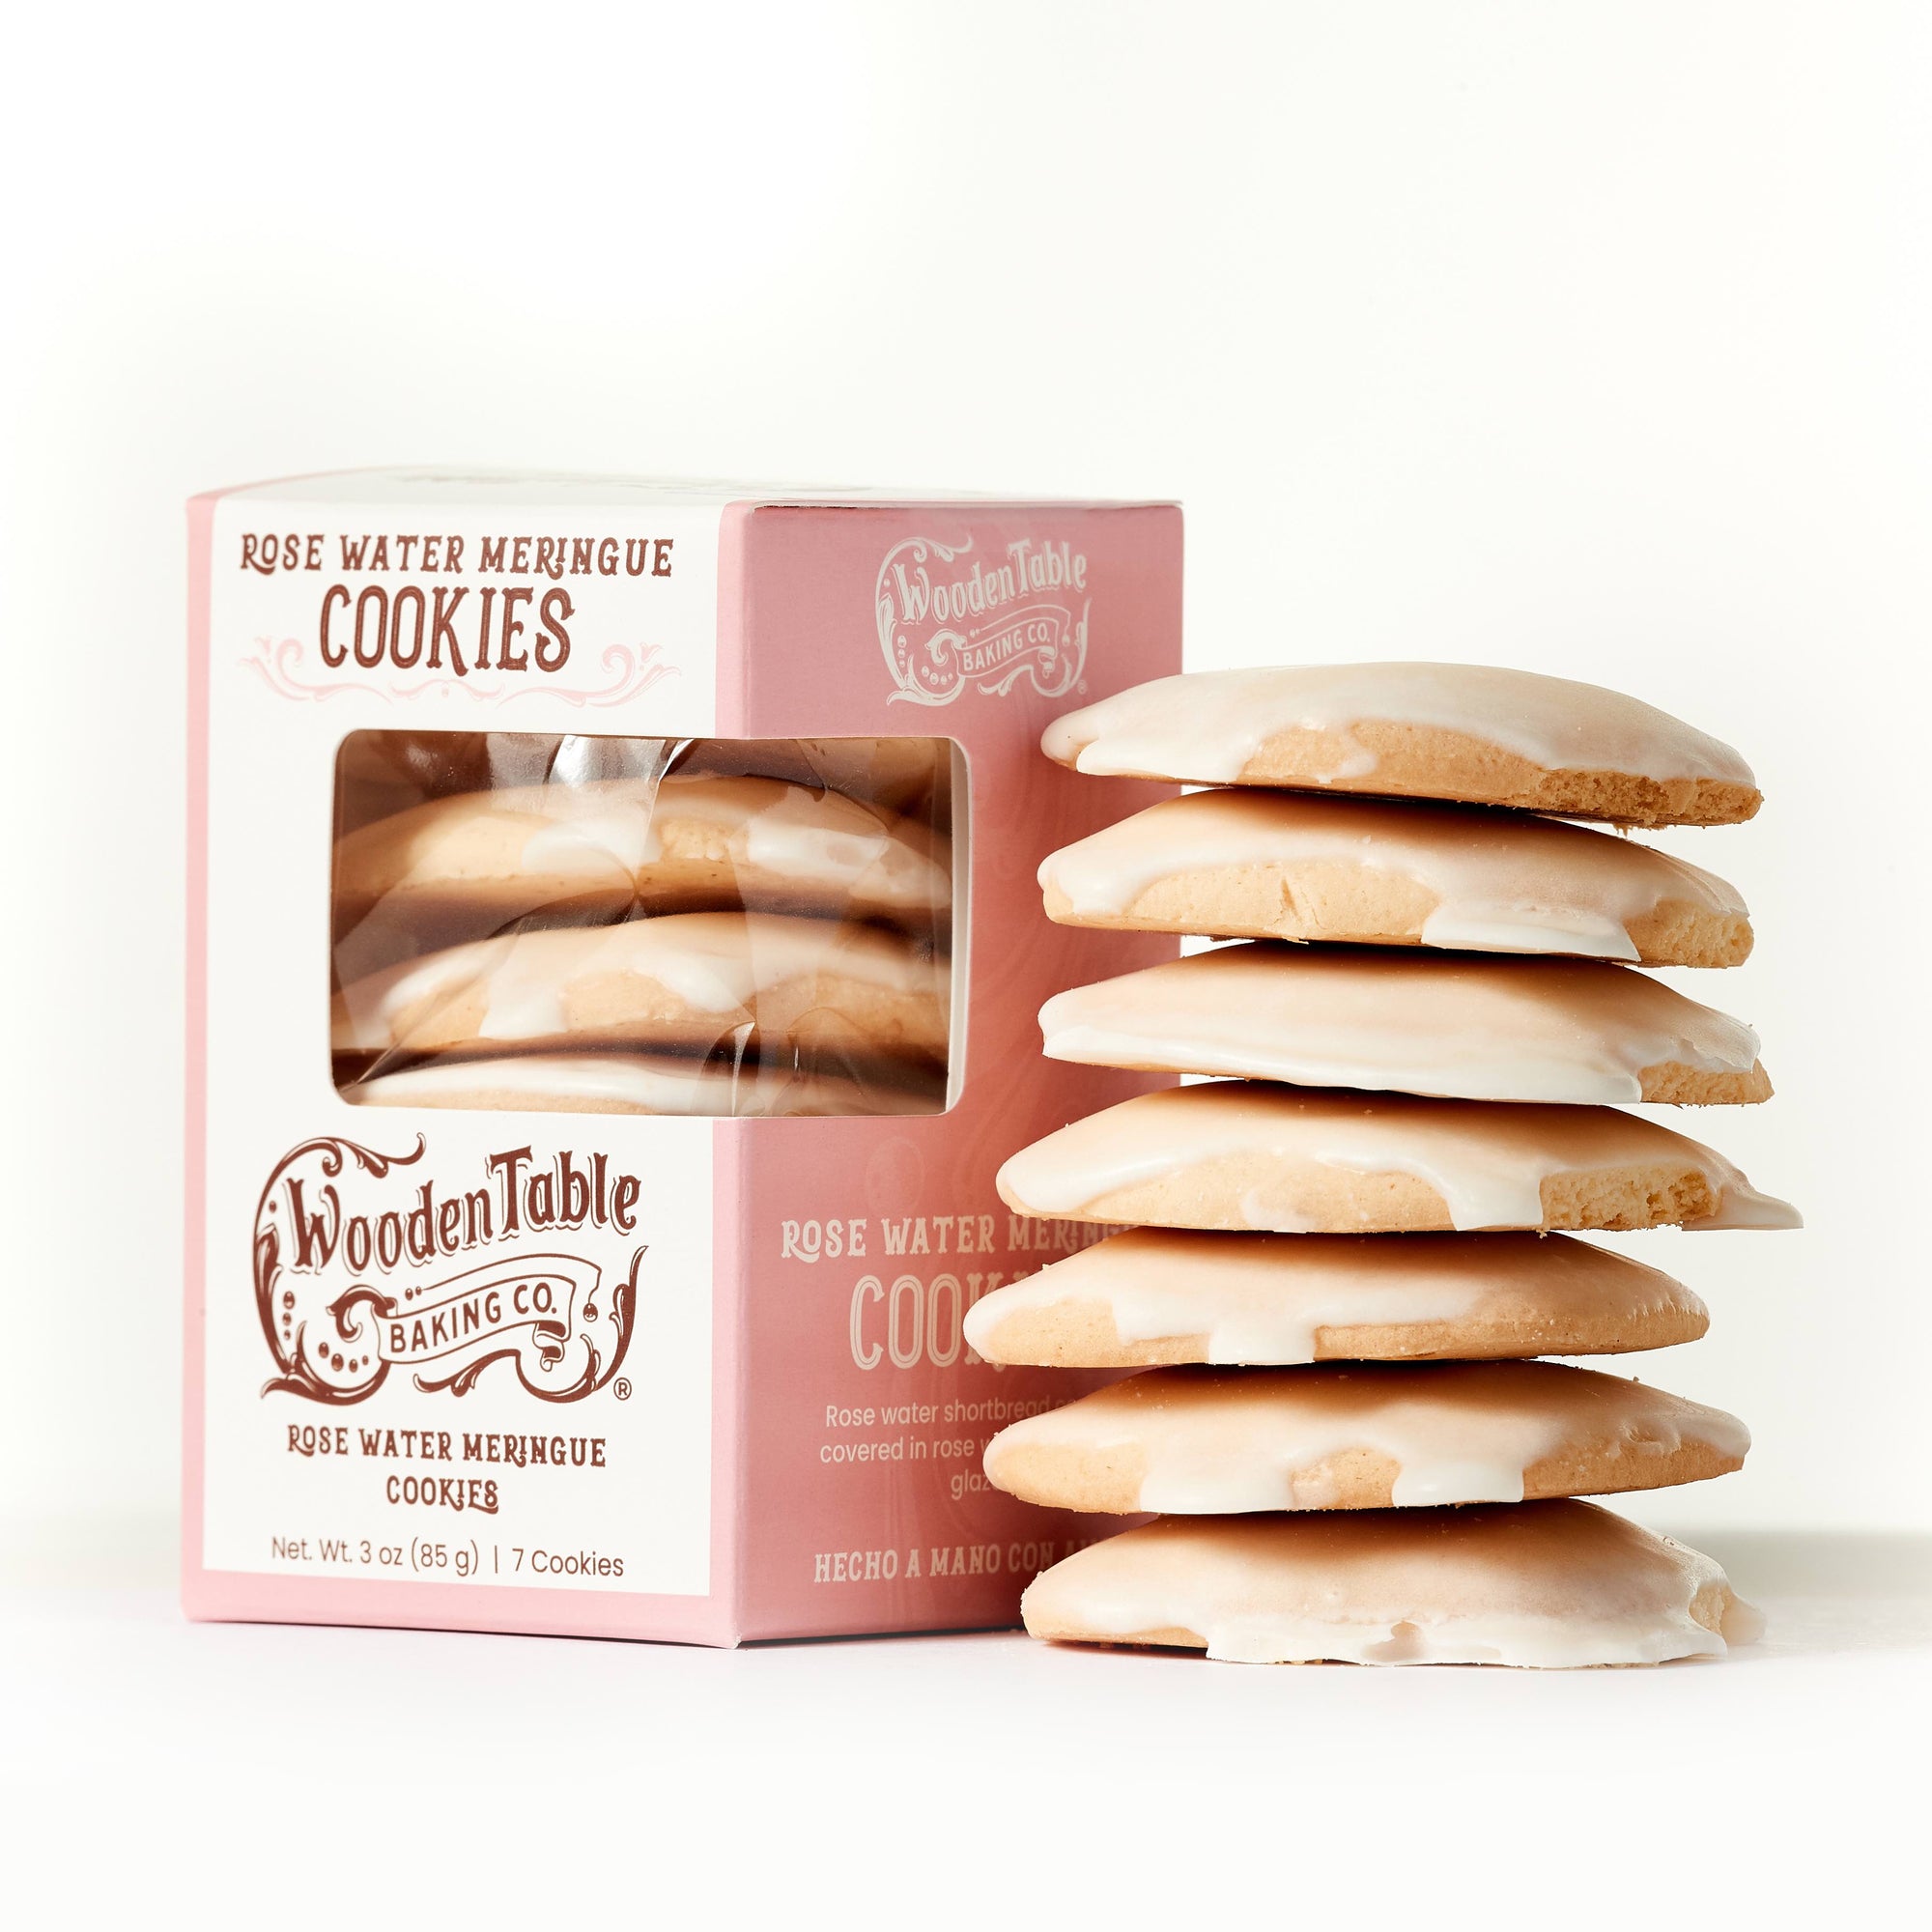 7 Rosewater Meringue Tea Cookies in Packaging from Wooden Table Baking Company